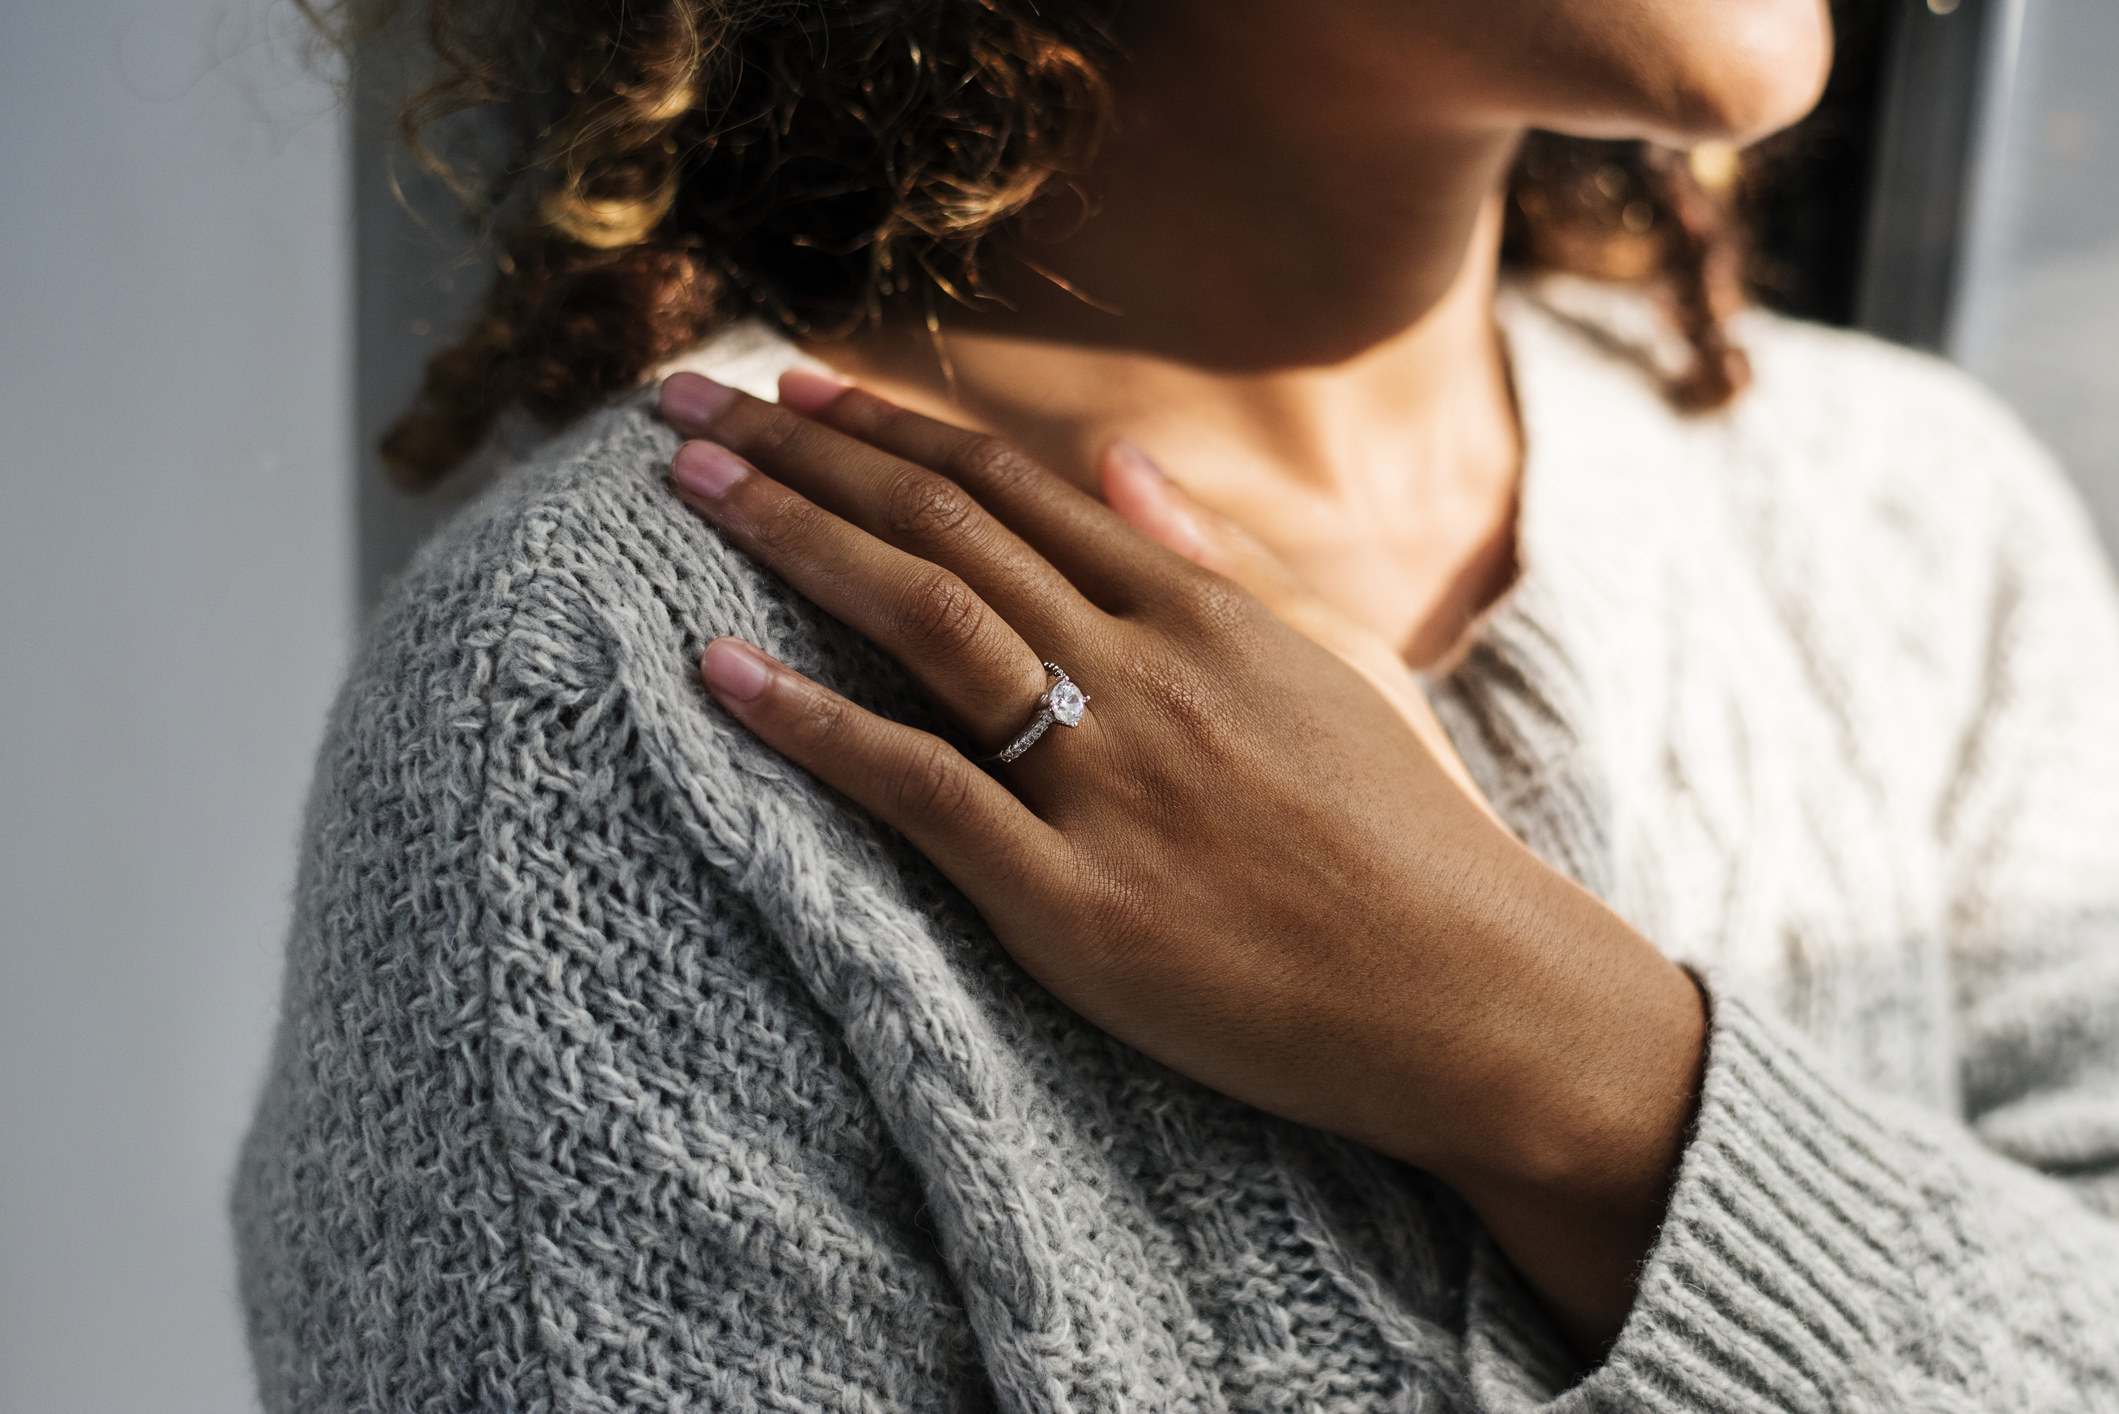 A woman touching her shoulder with a hand that has an engagement ring on it